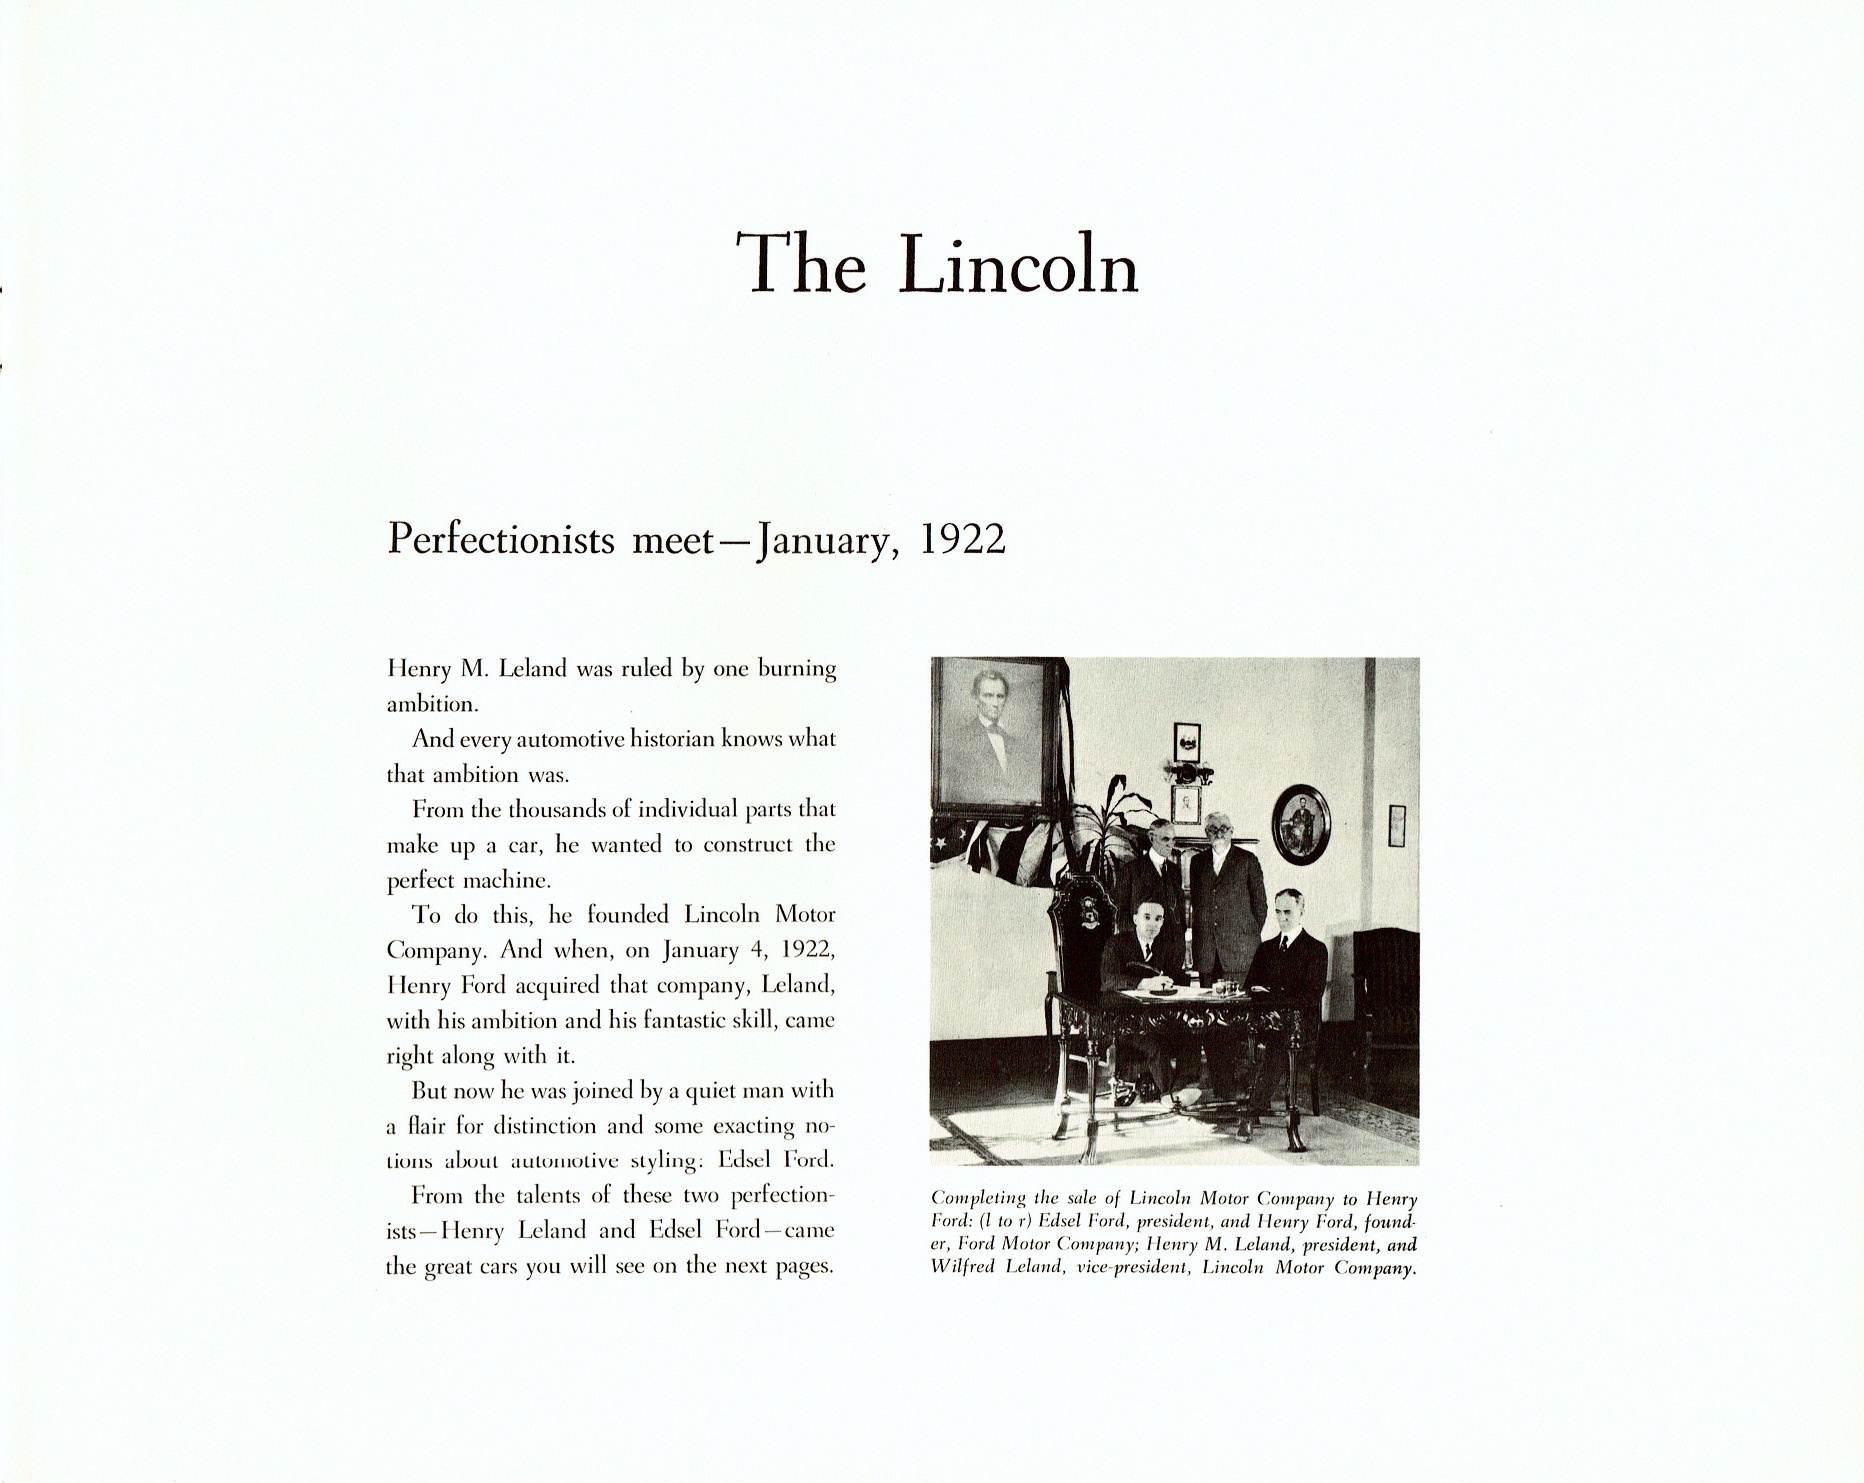 1959_Lincoln_Mailer-05